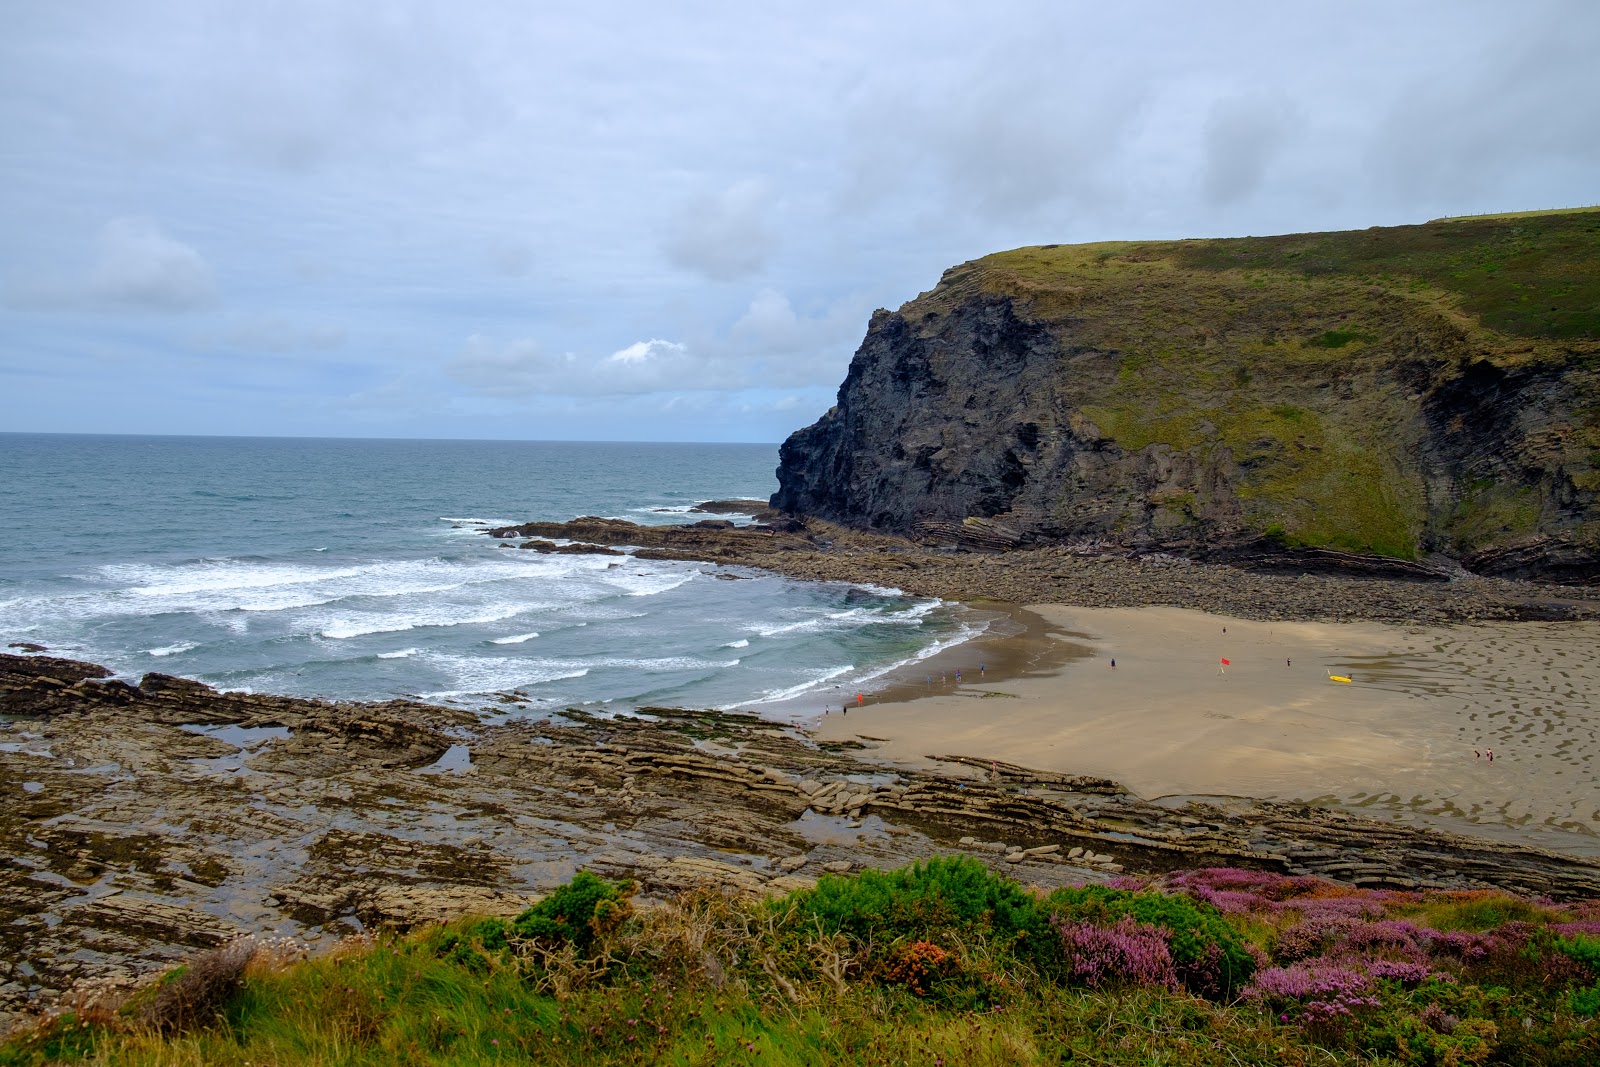 Photo of Crackington beach surrounded by mountains